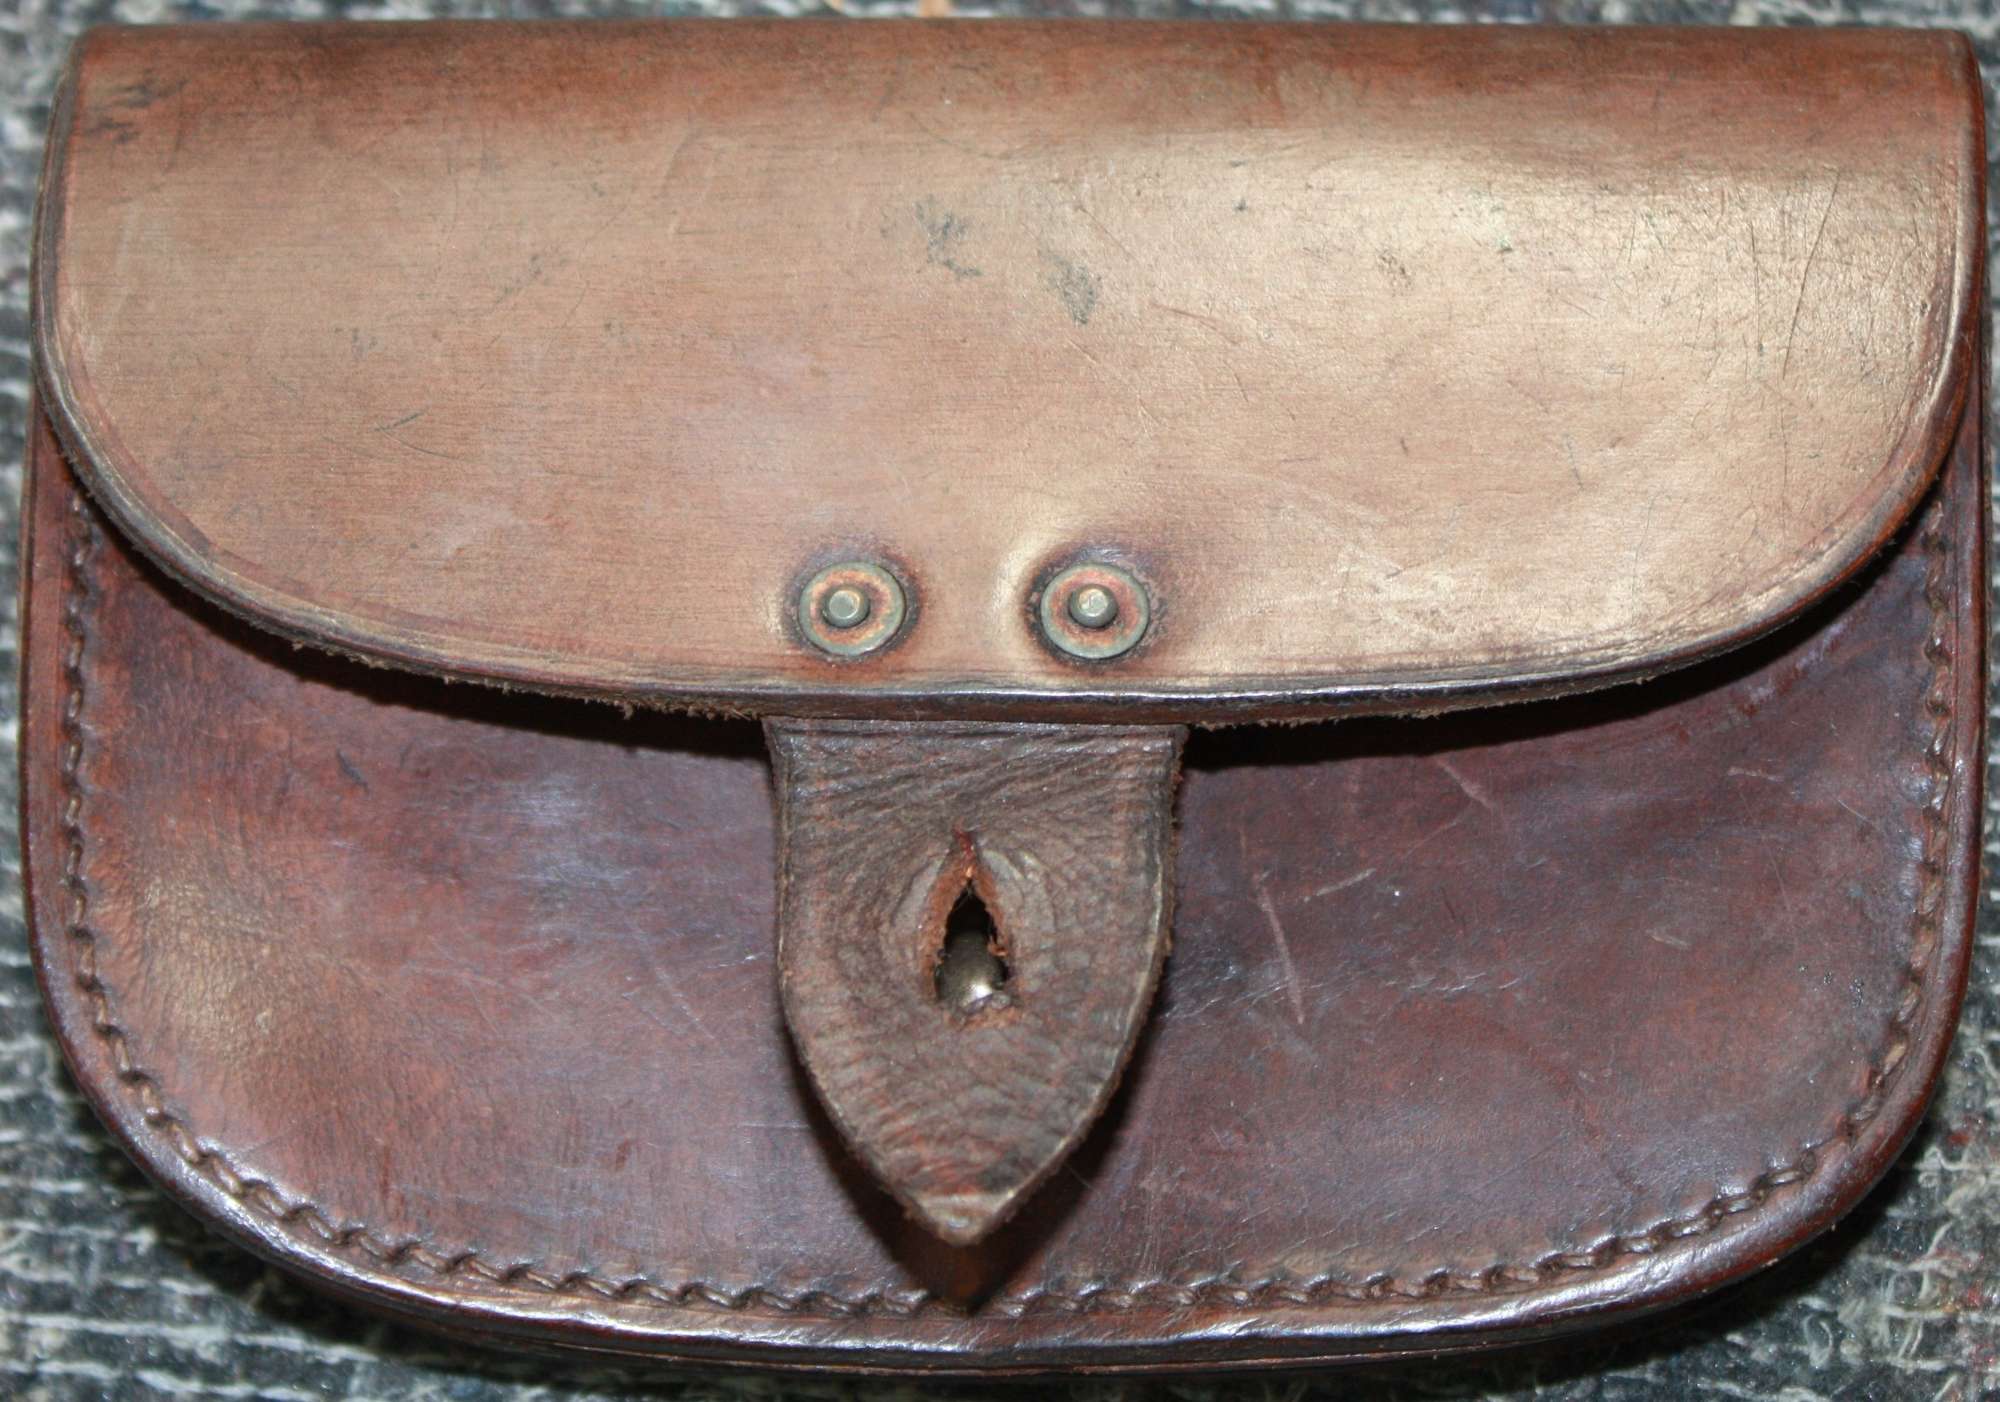 A WWII 1941 DATED NAVY PATTERN LEATHER PISTOL AMMO POUCH